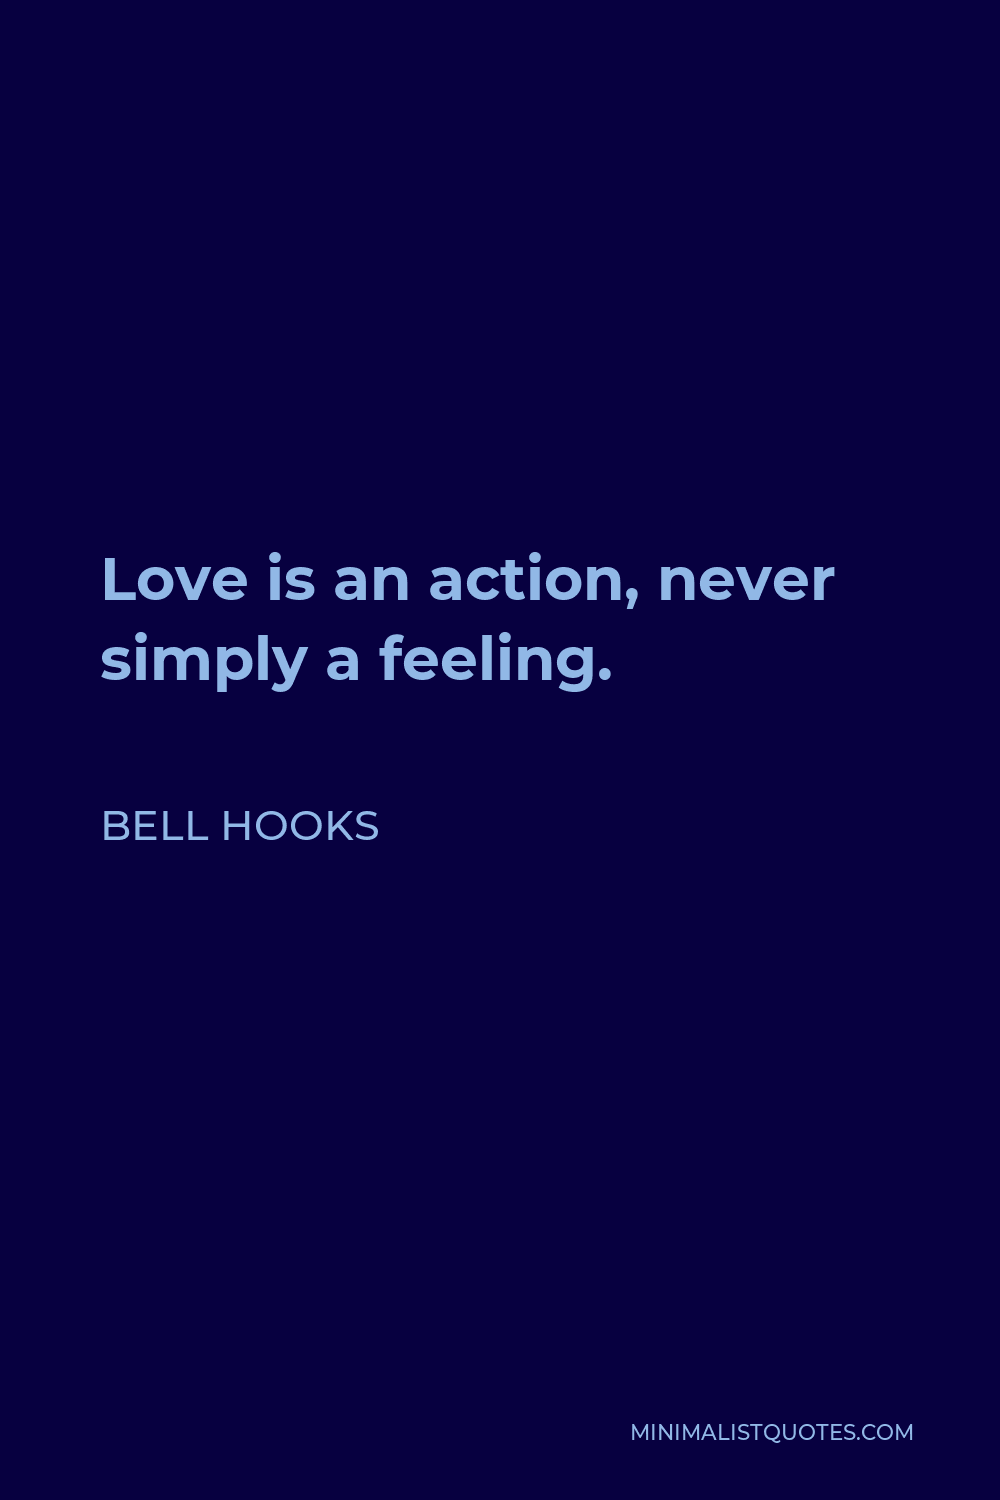 Bell Hooks Quote - Love is an action, never simply a feeling.